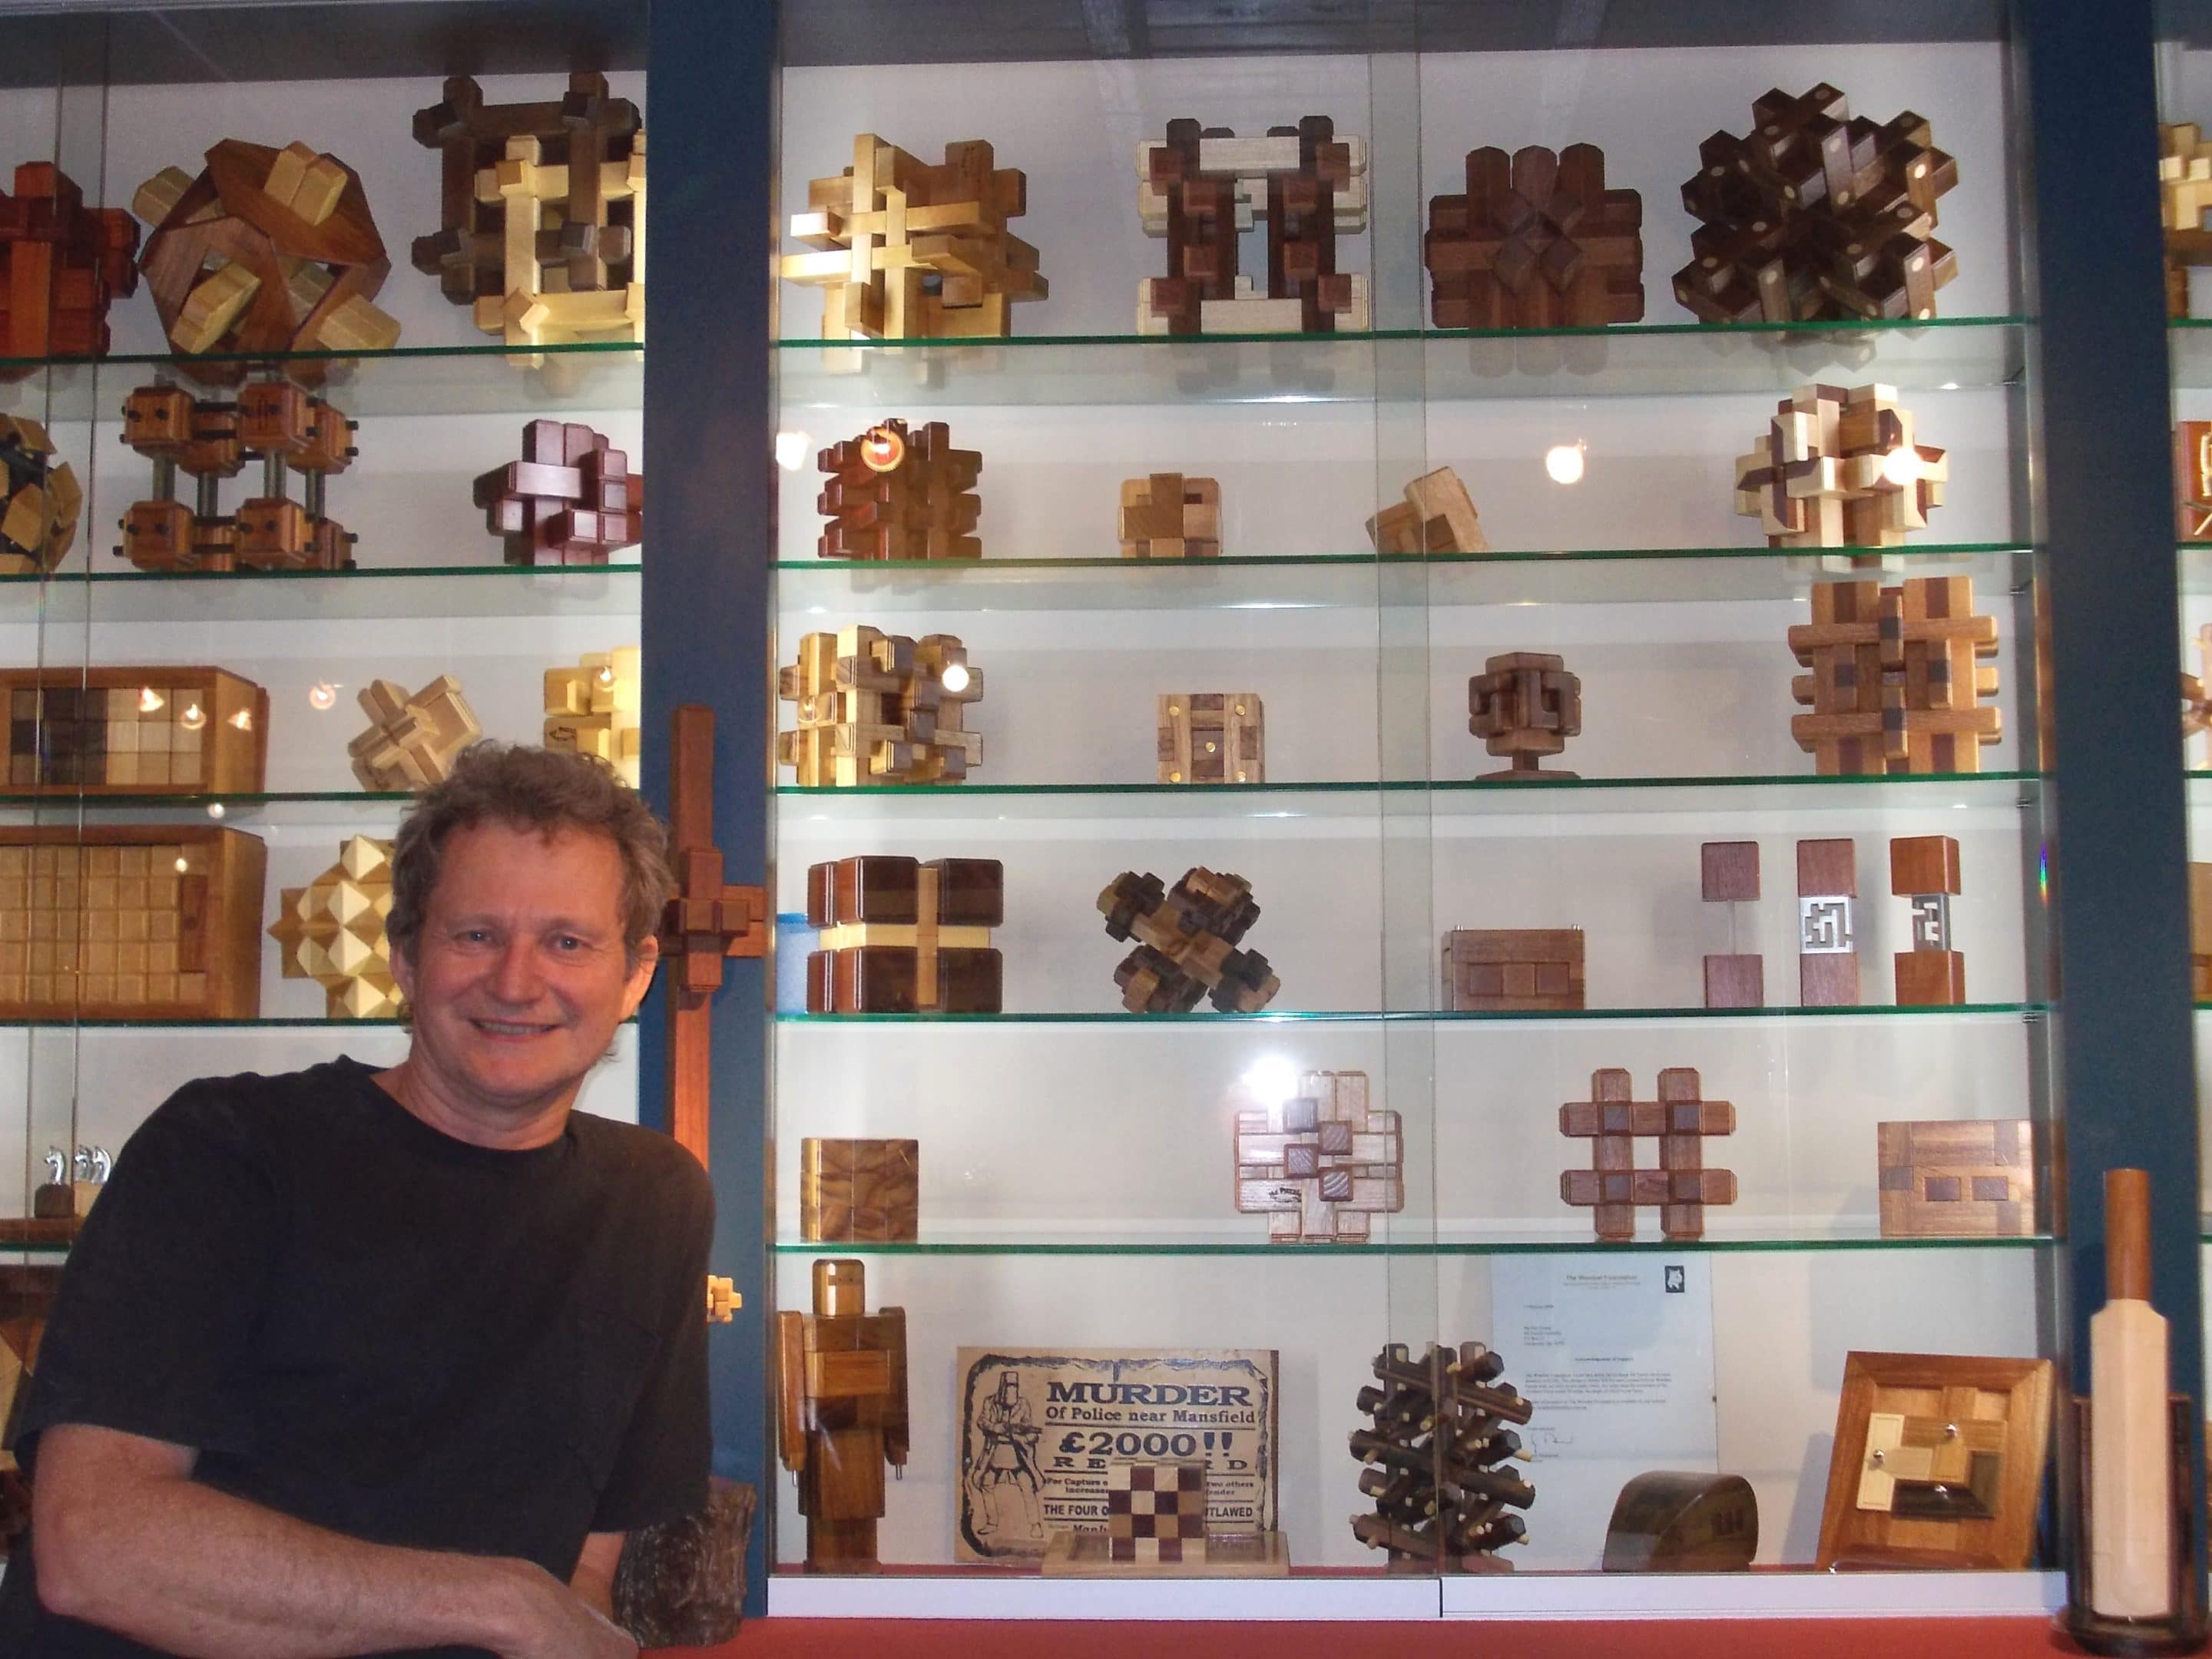 Brian and some of the #1 Limited Edition puzzles he displays in his puzzle room.